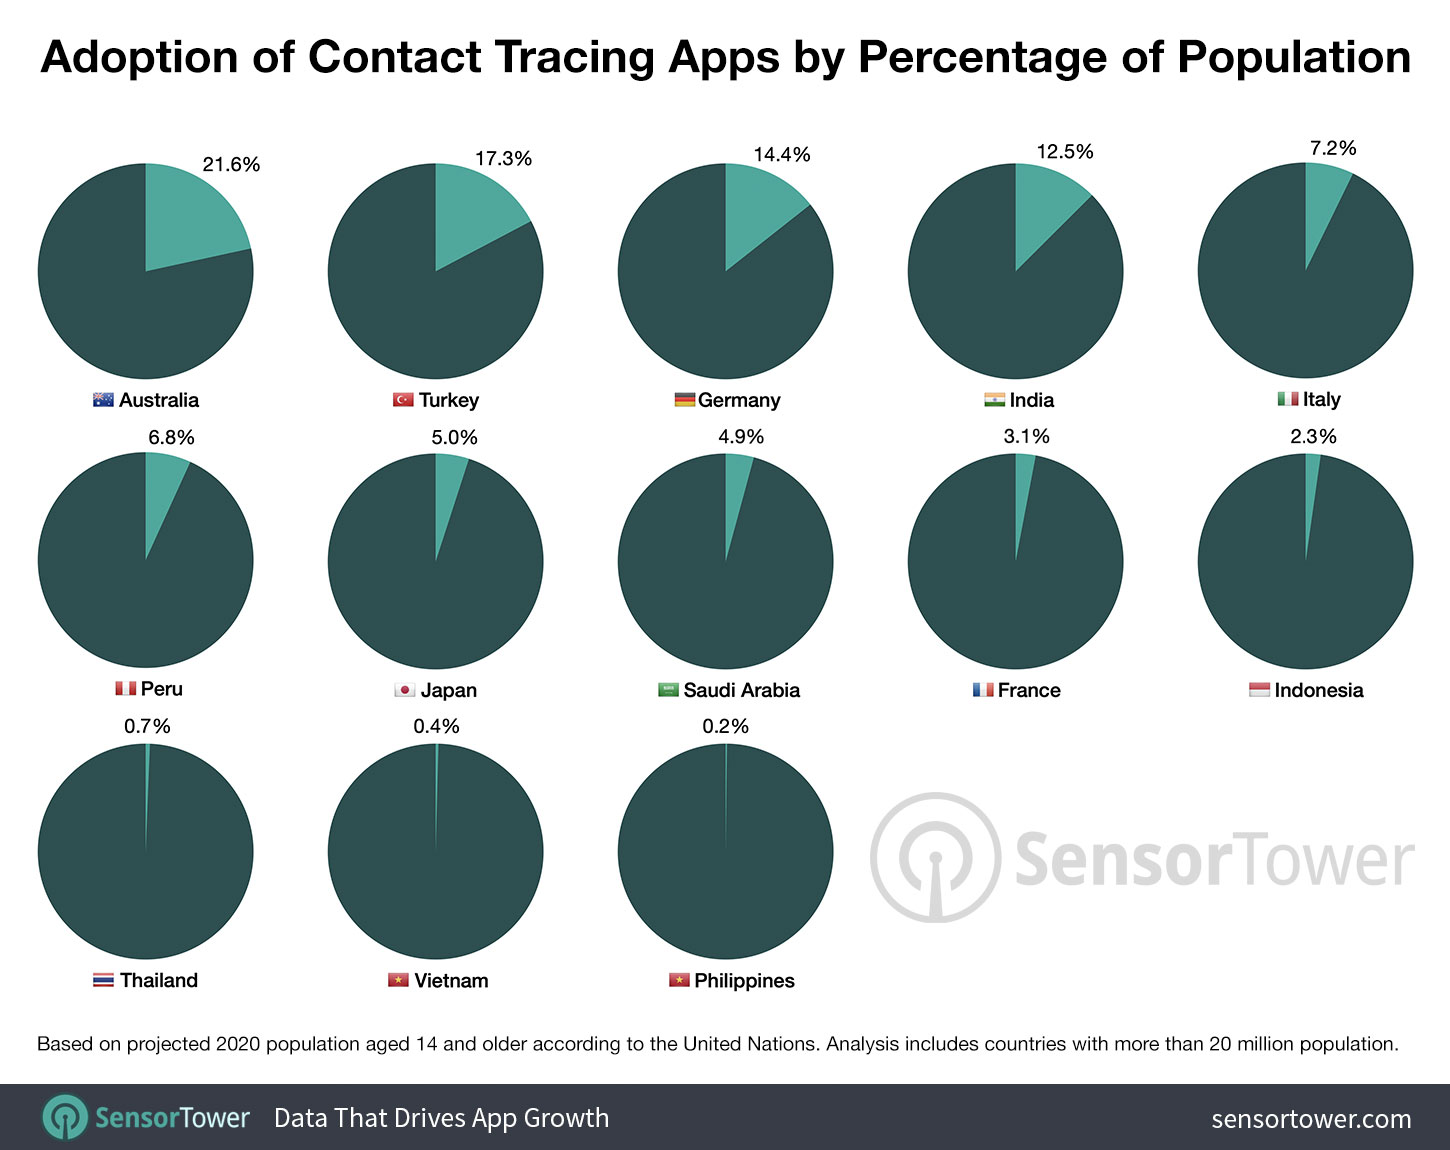 Adoption of contact tracing apps in different countries